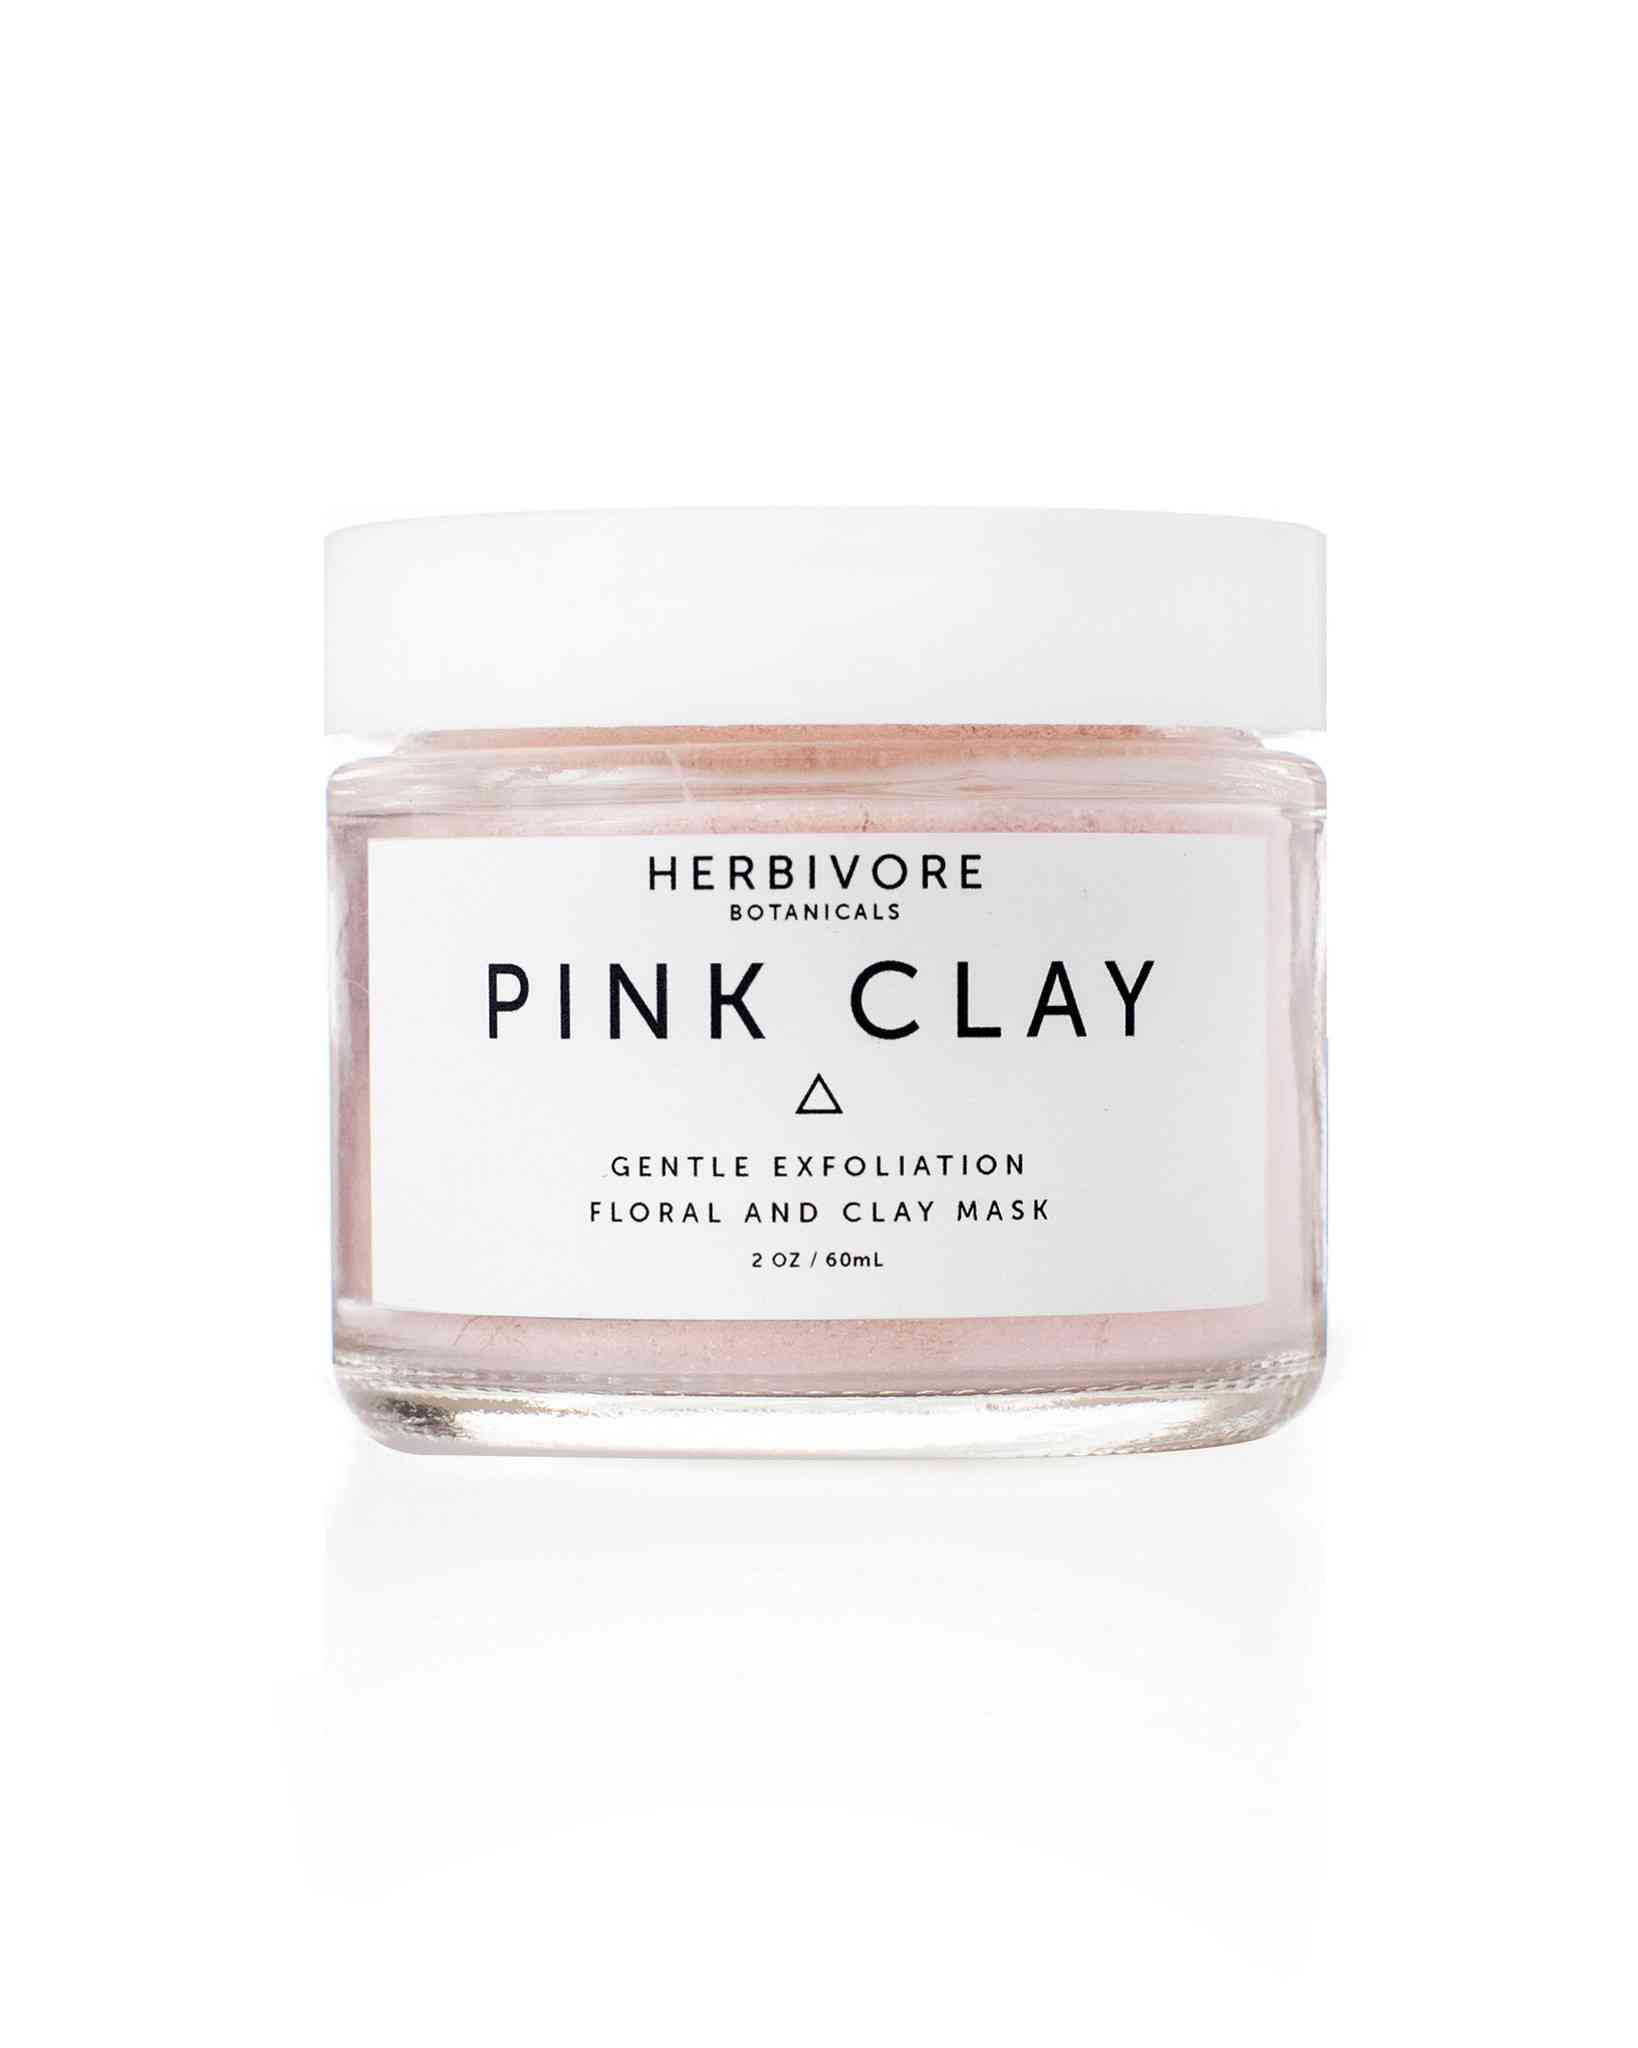 Herbivore Pink Clay Exfoiliating Mask